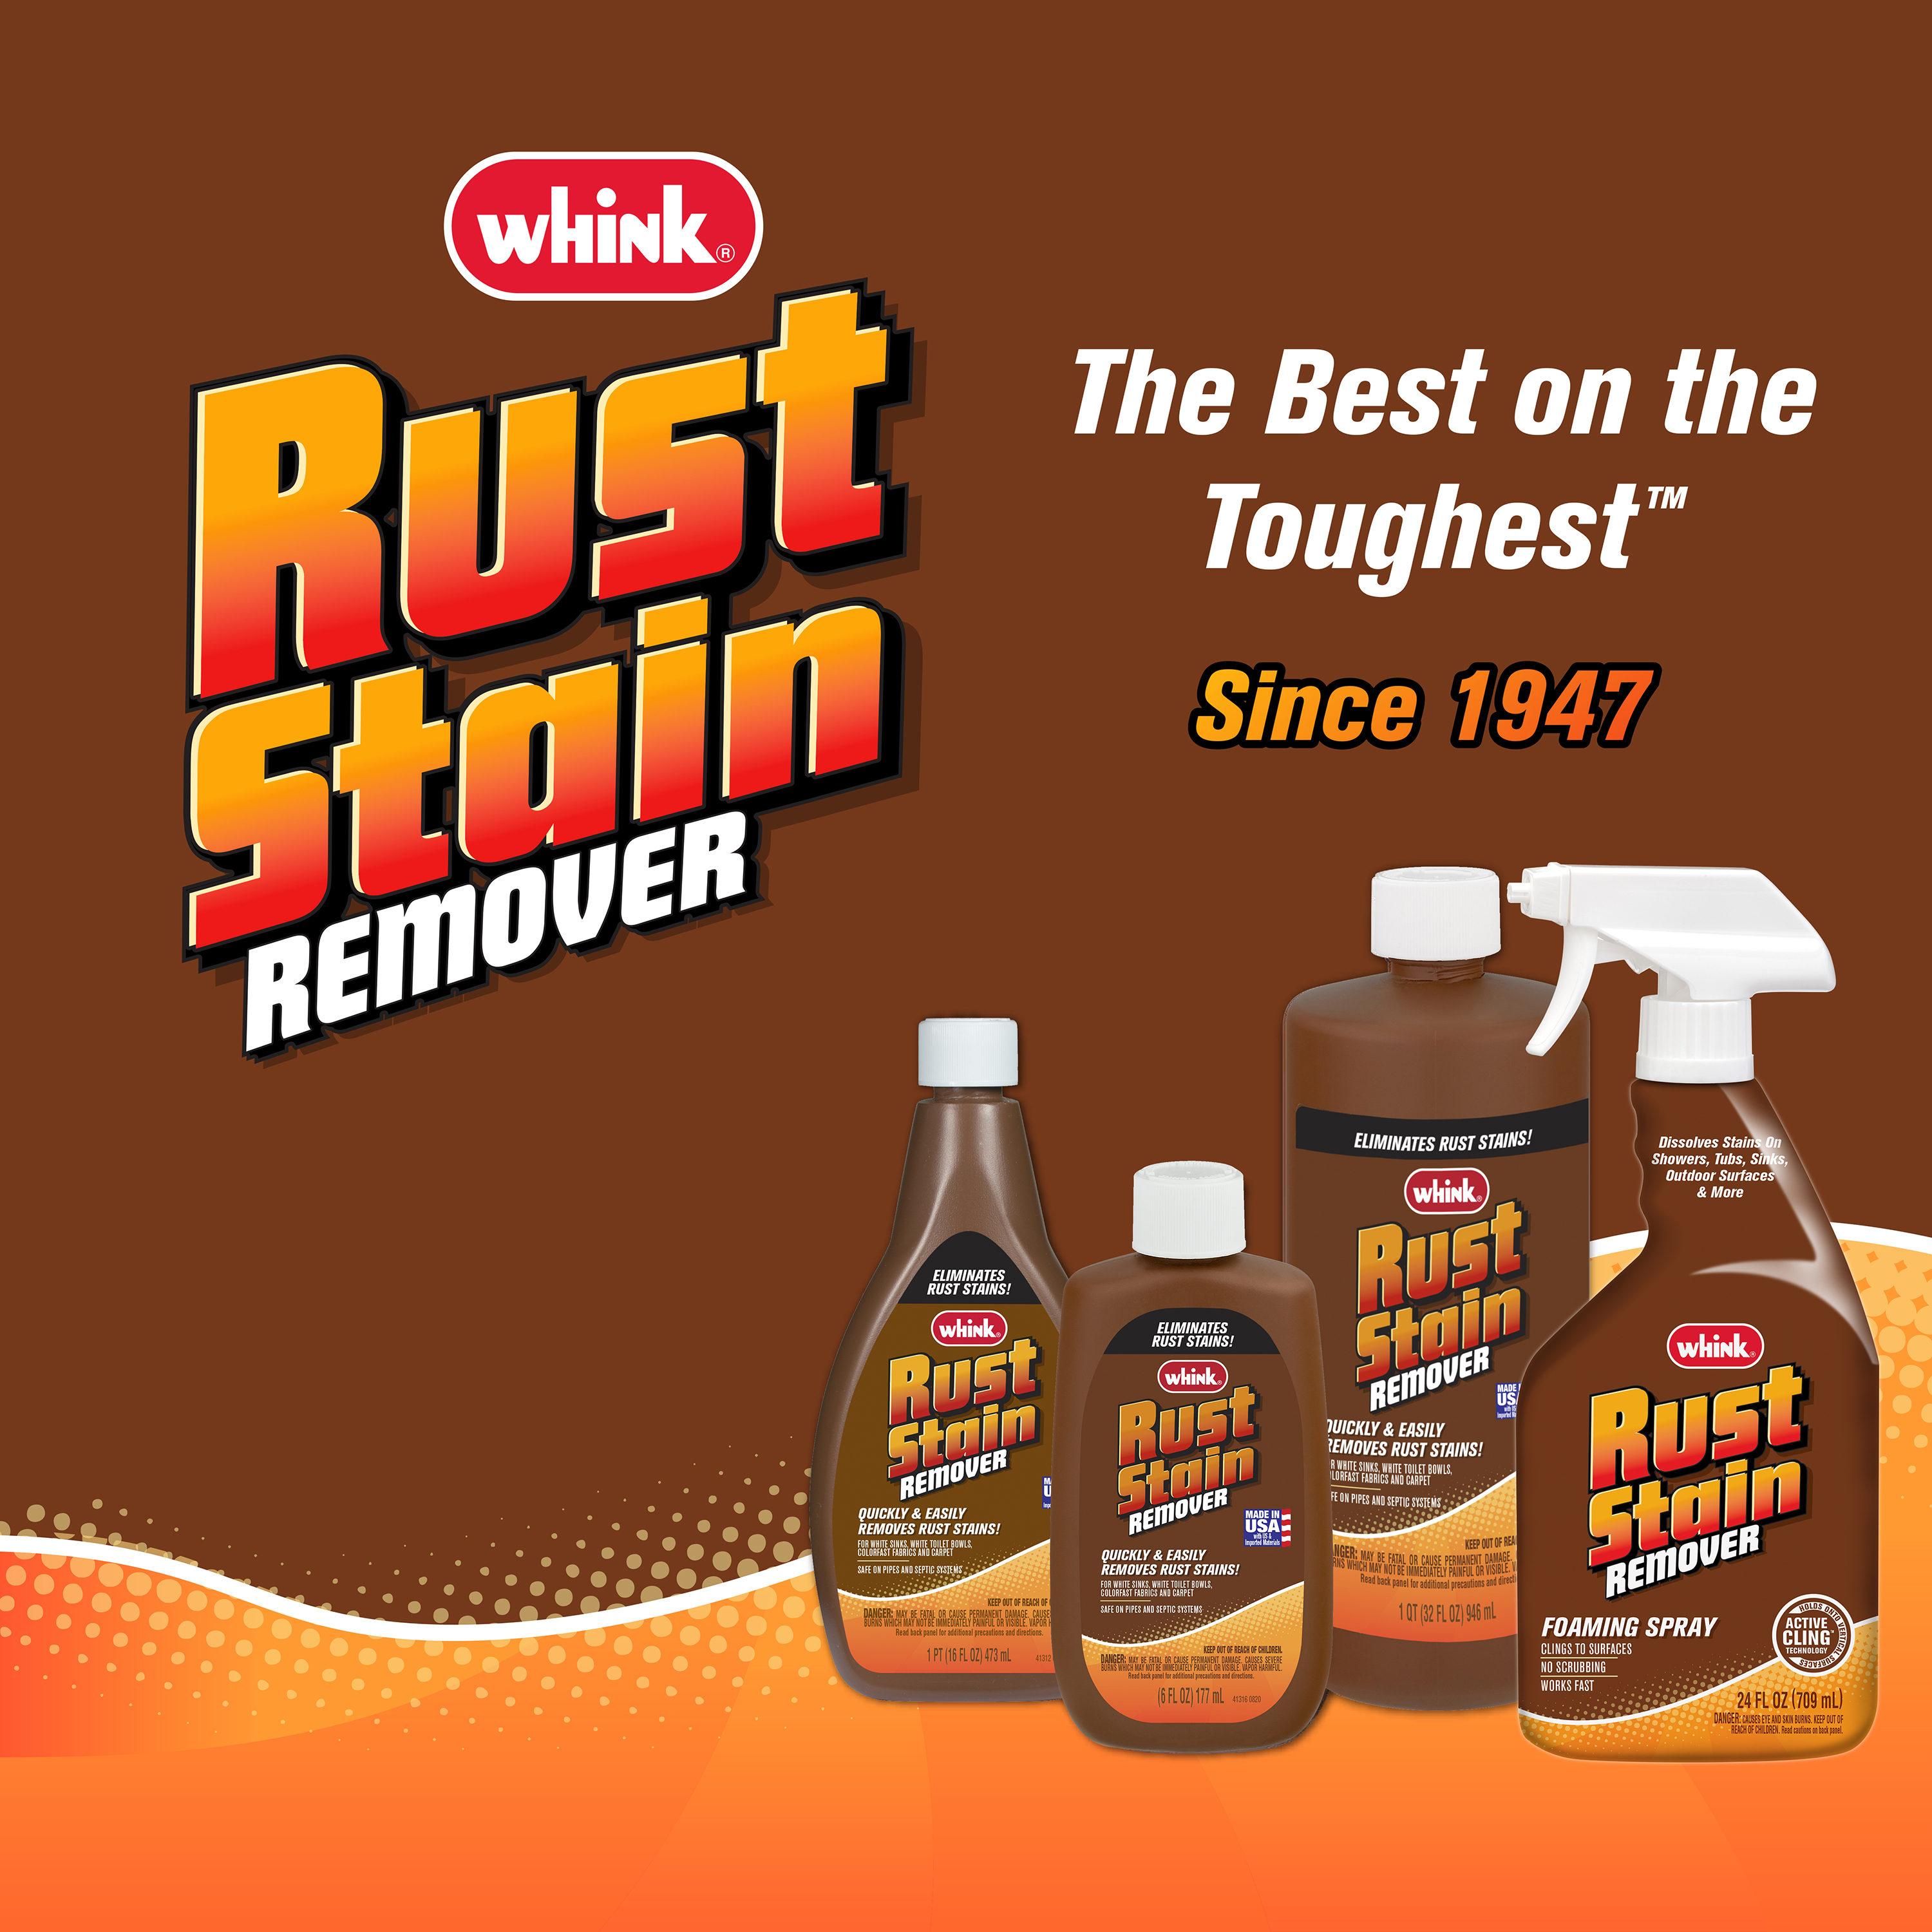 Whink Rust Stain Remover, 16 oz - image 4 of 10